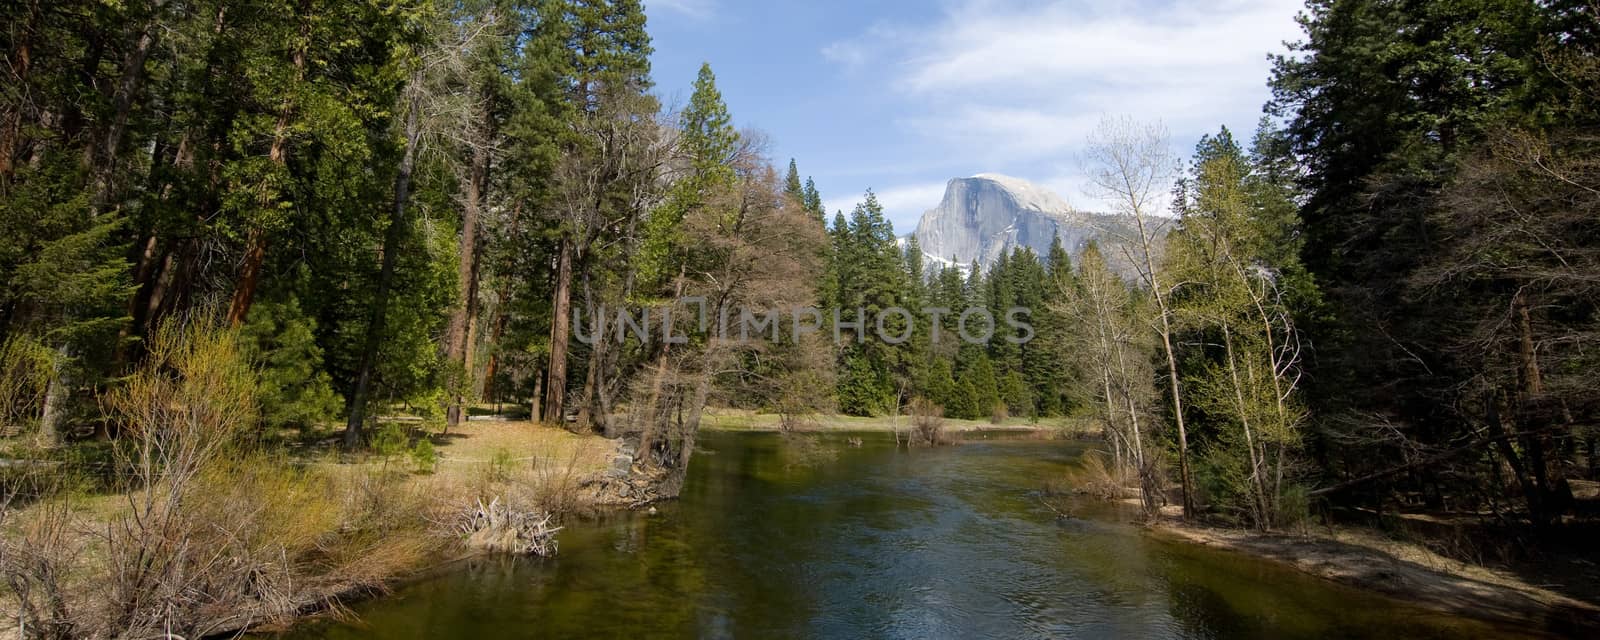 Trees in a forest with mountain in the background, Half Dome, Yosemite Valley, Yosemite National Park, California, USA